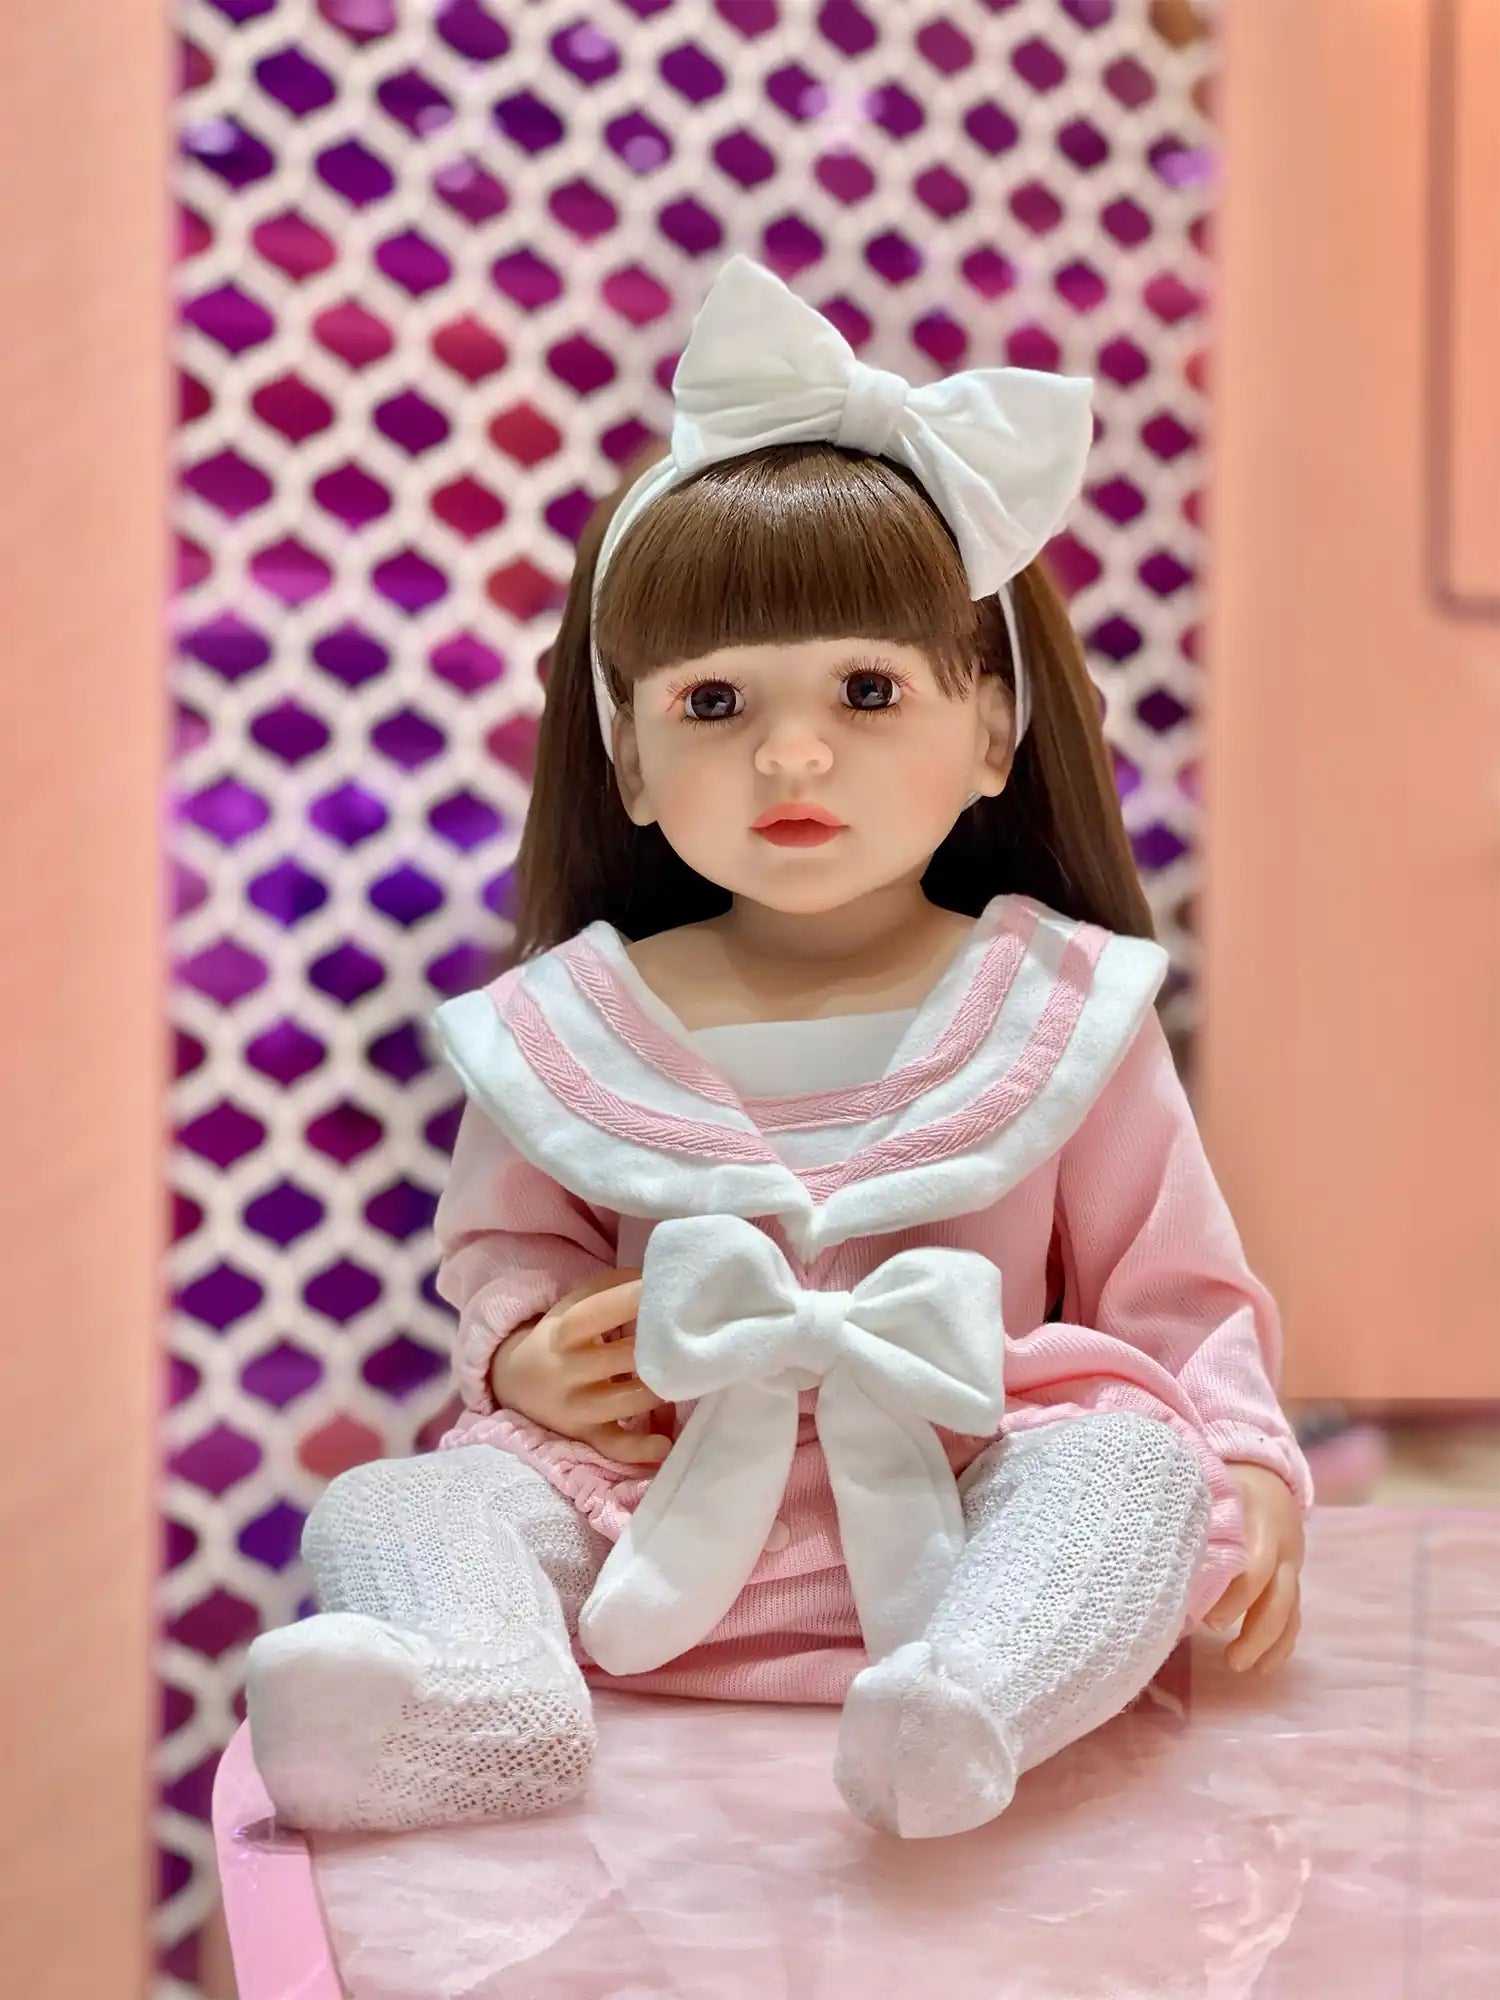 Realistic doll in a pink striped dress and white leggings, seated at a party.